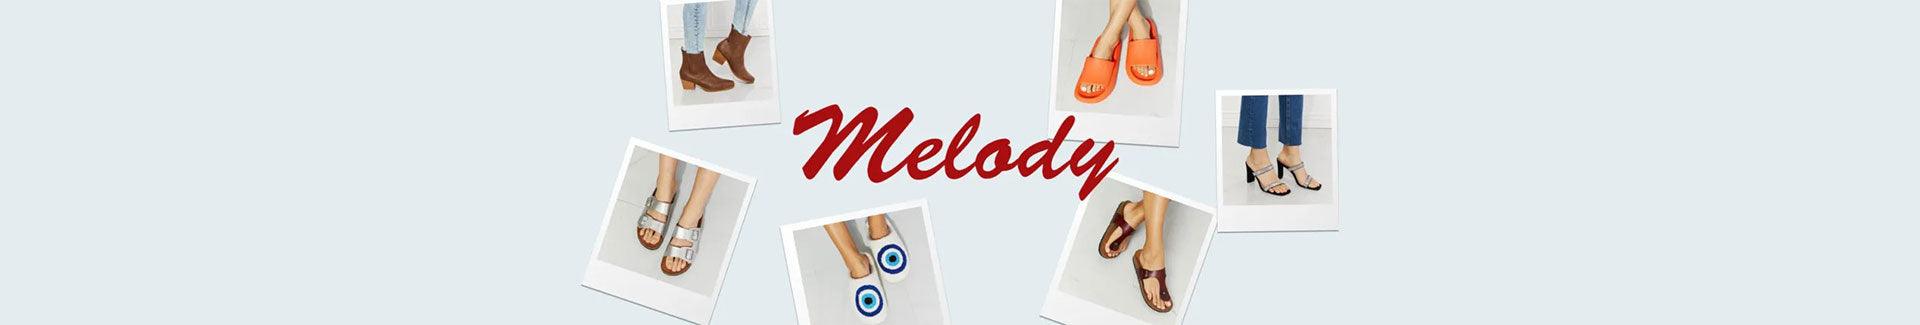 Buy Melody Shoes On Sale - Daily Fashion